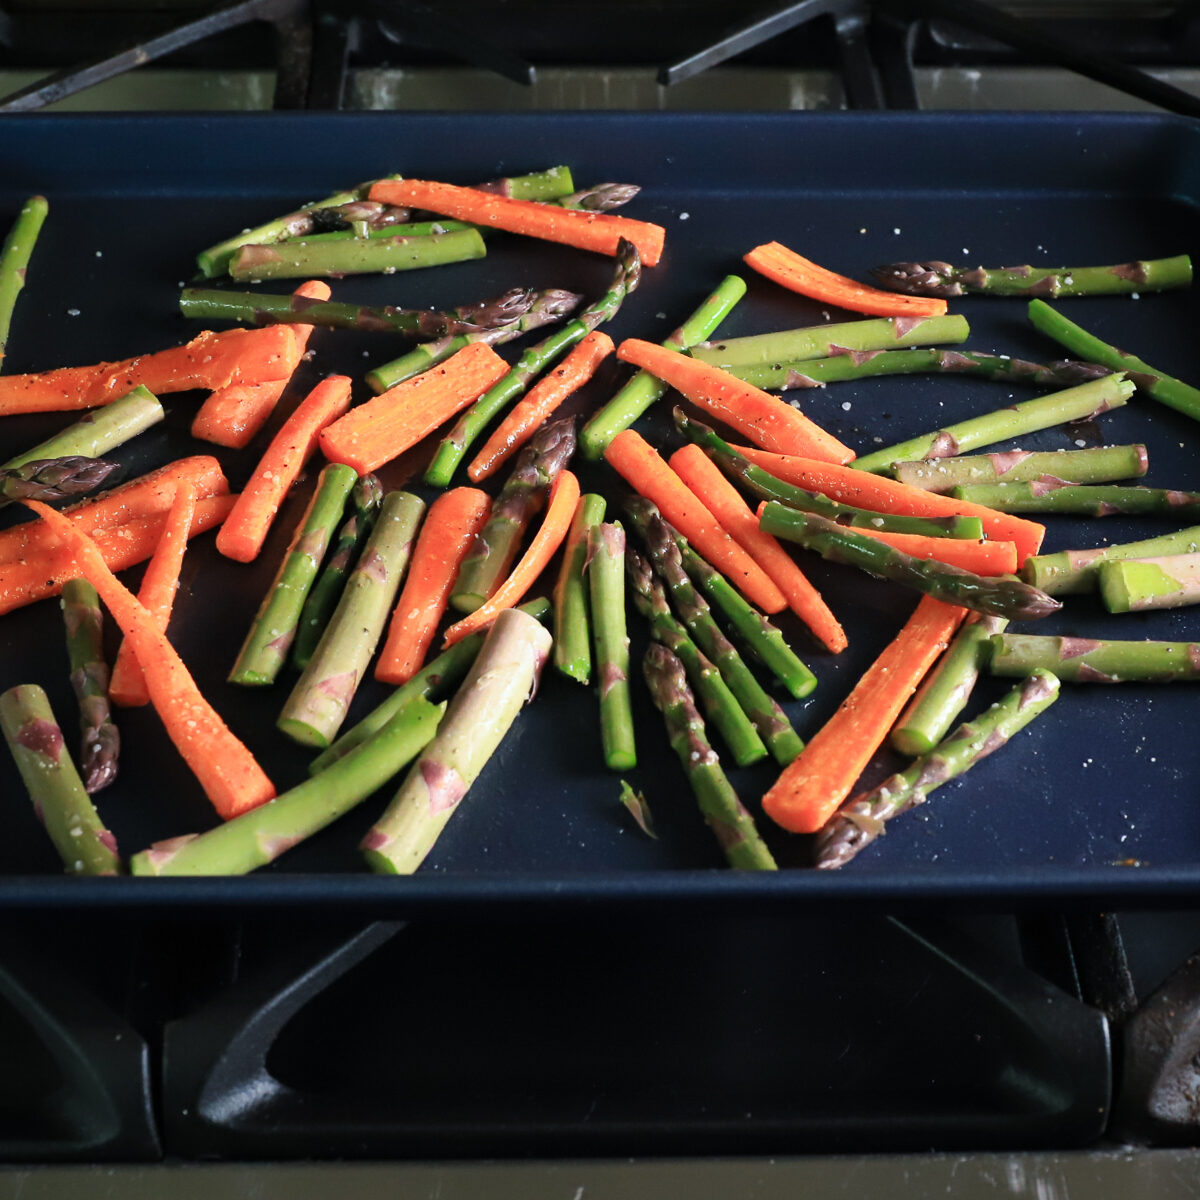 The cut carrots and asparagus are spread out on the dark blue baking sheet so they roast evenly.